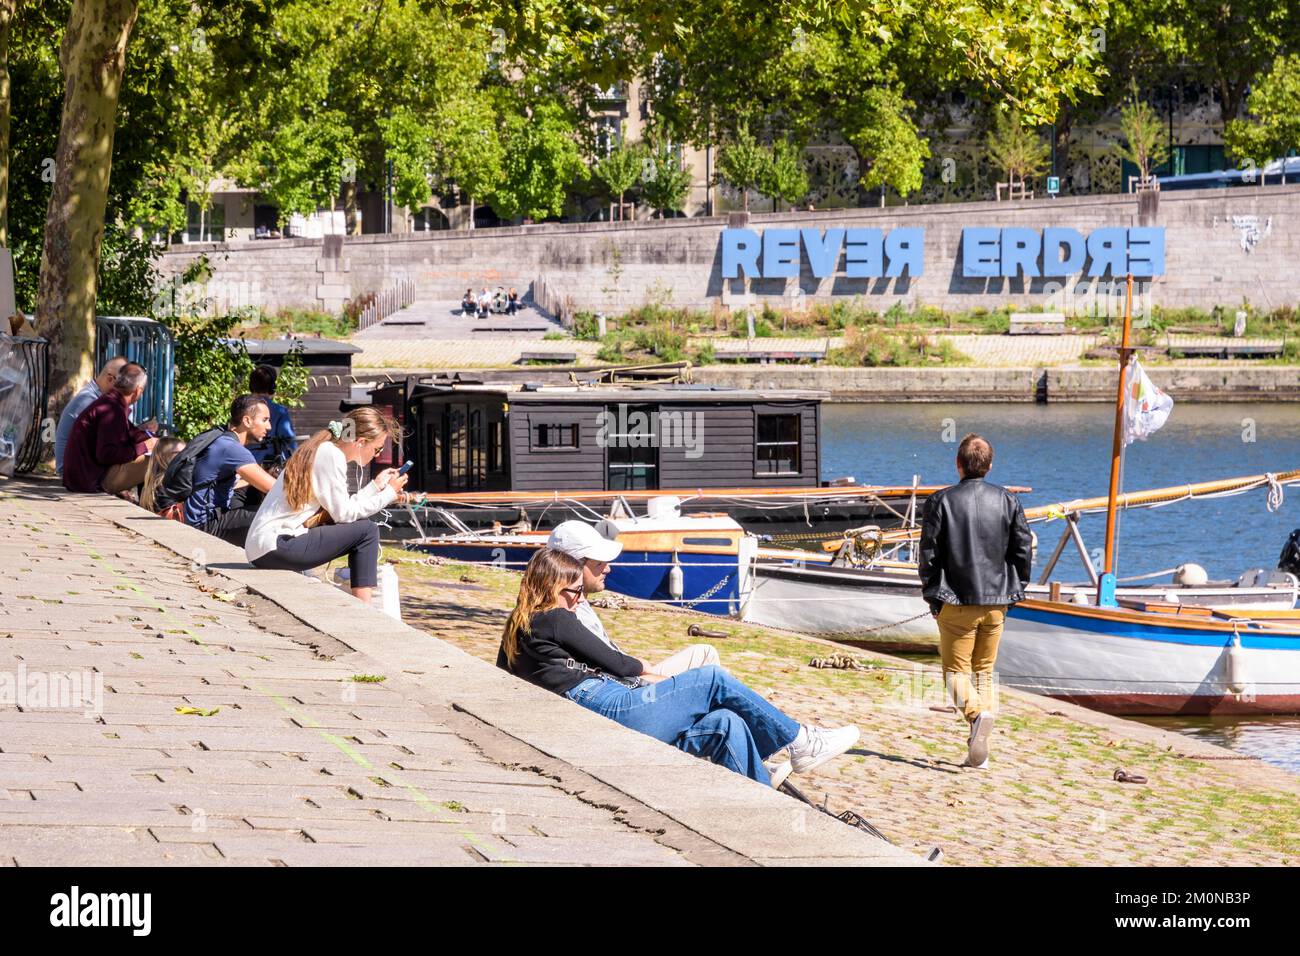 Young people enjoy the sunshine sitting on the banks of the Erdre river in Nantes, France, with the large sign 'REVER ERDRE' in the background. Stock Photo